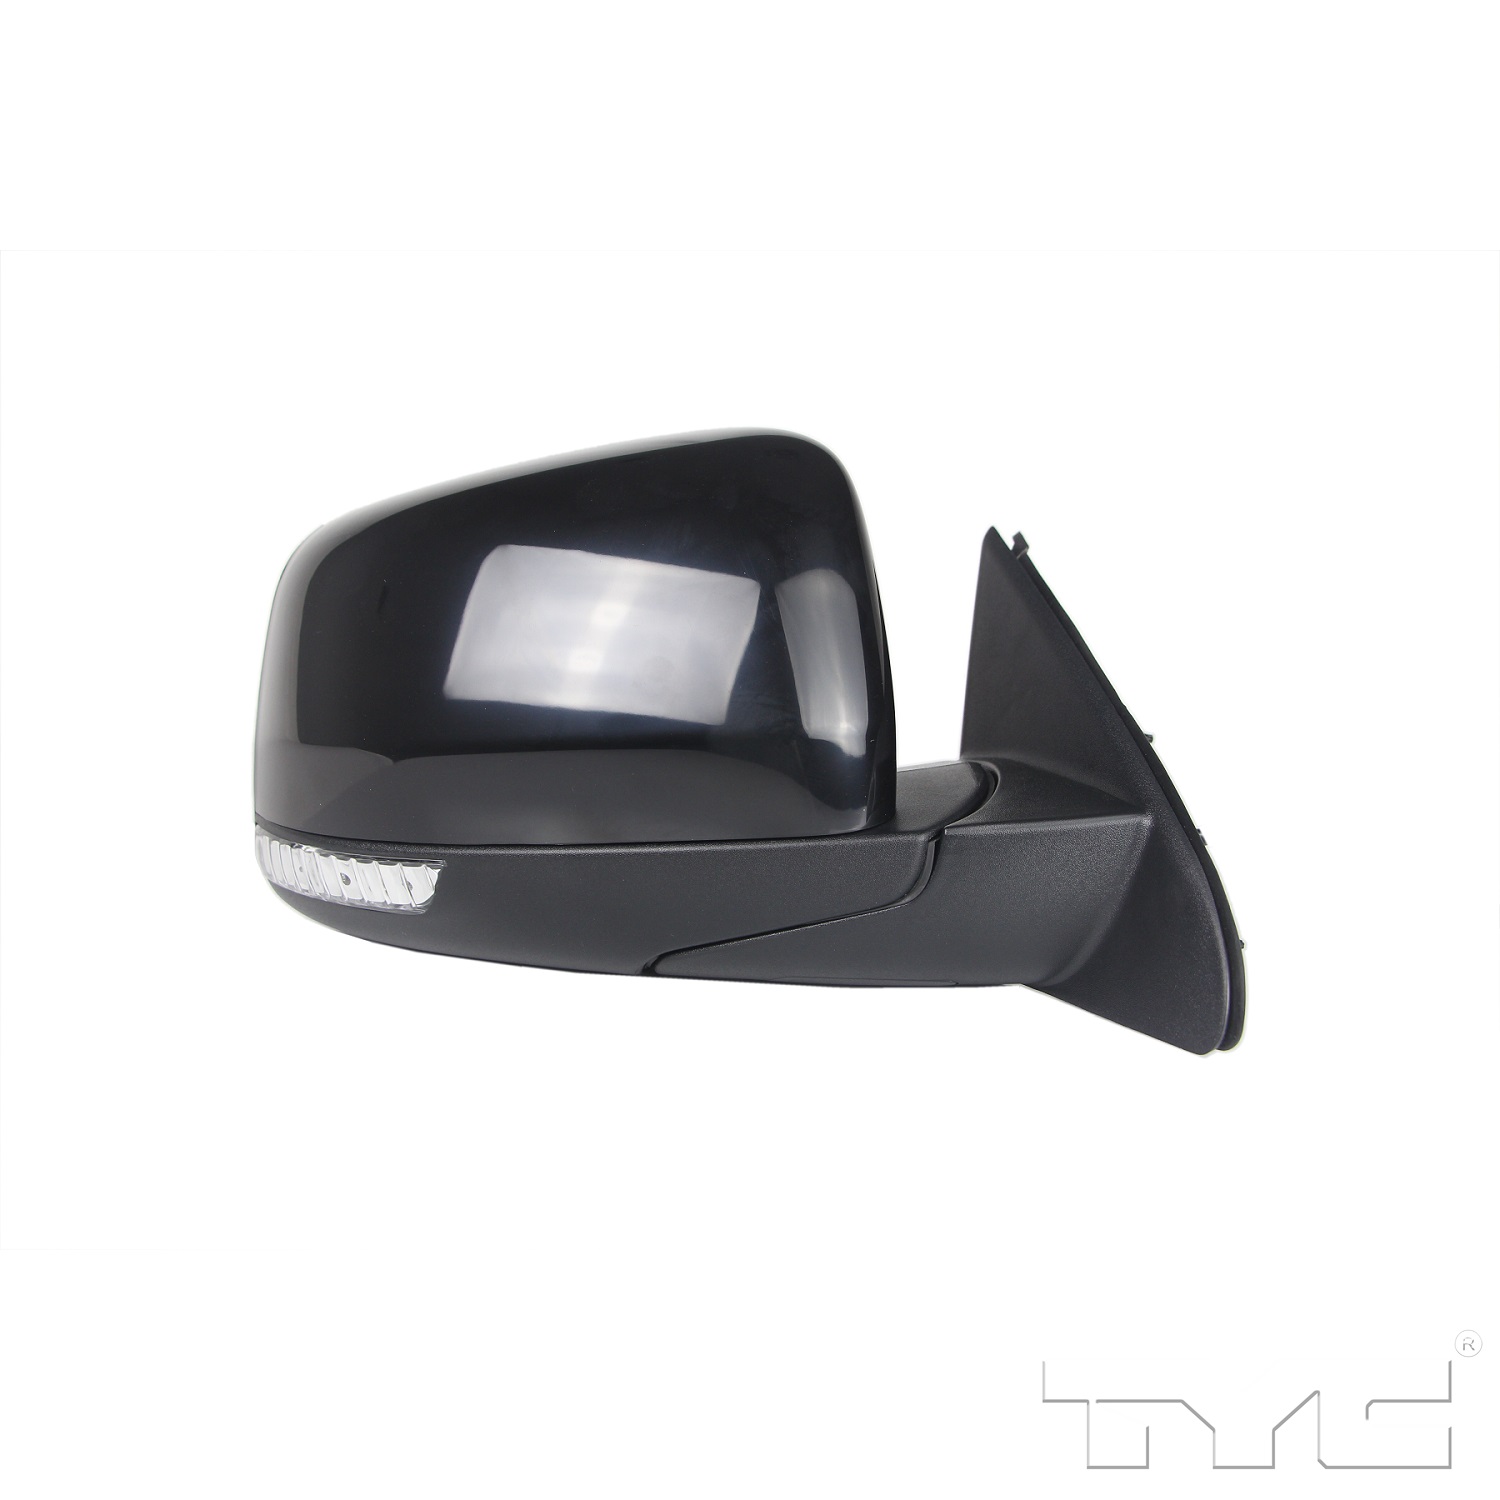 Aftermarket MIRRORS for JEEP - GRAND CHEROKEE, GRAND CHEROKEE,14-21,RT Mirror outside rear view